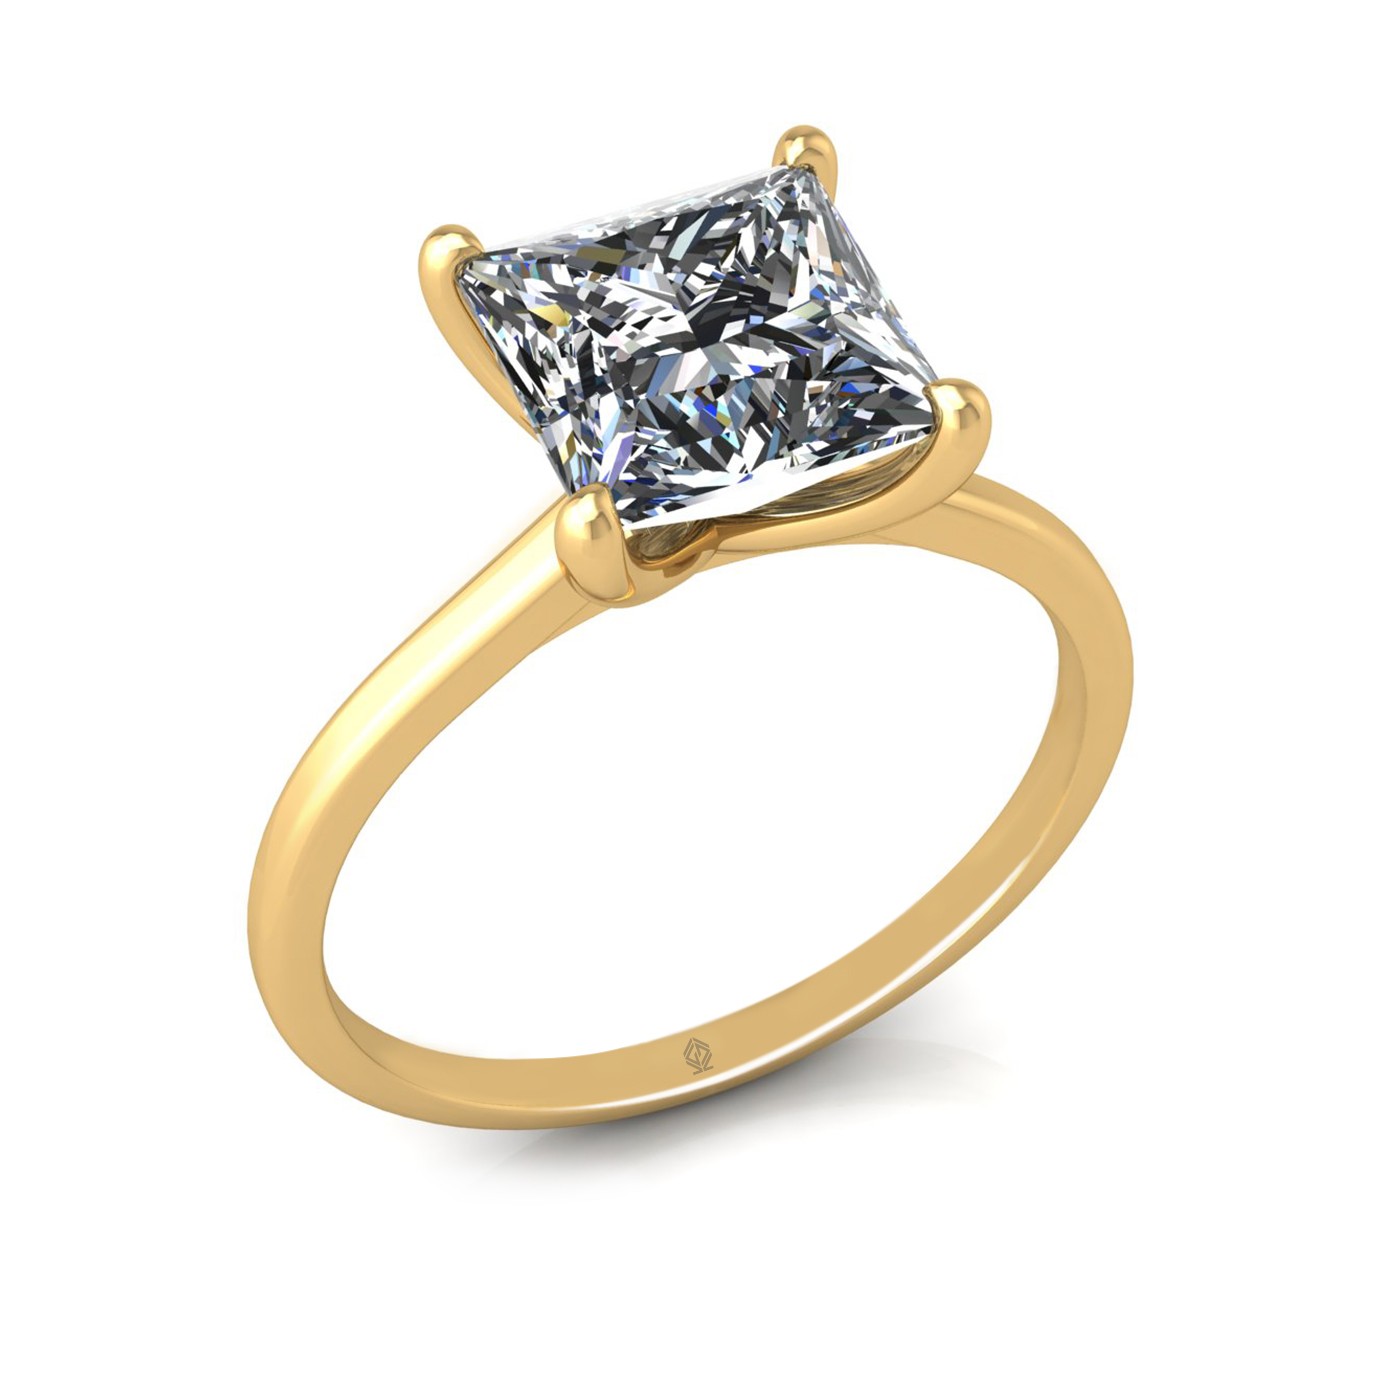 18k yellow gold  2,50 ct 4 prongs solitaire princess cut diamond engagement ring with whisper thin band